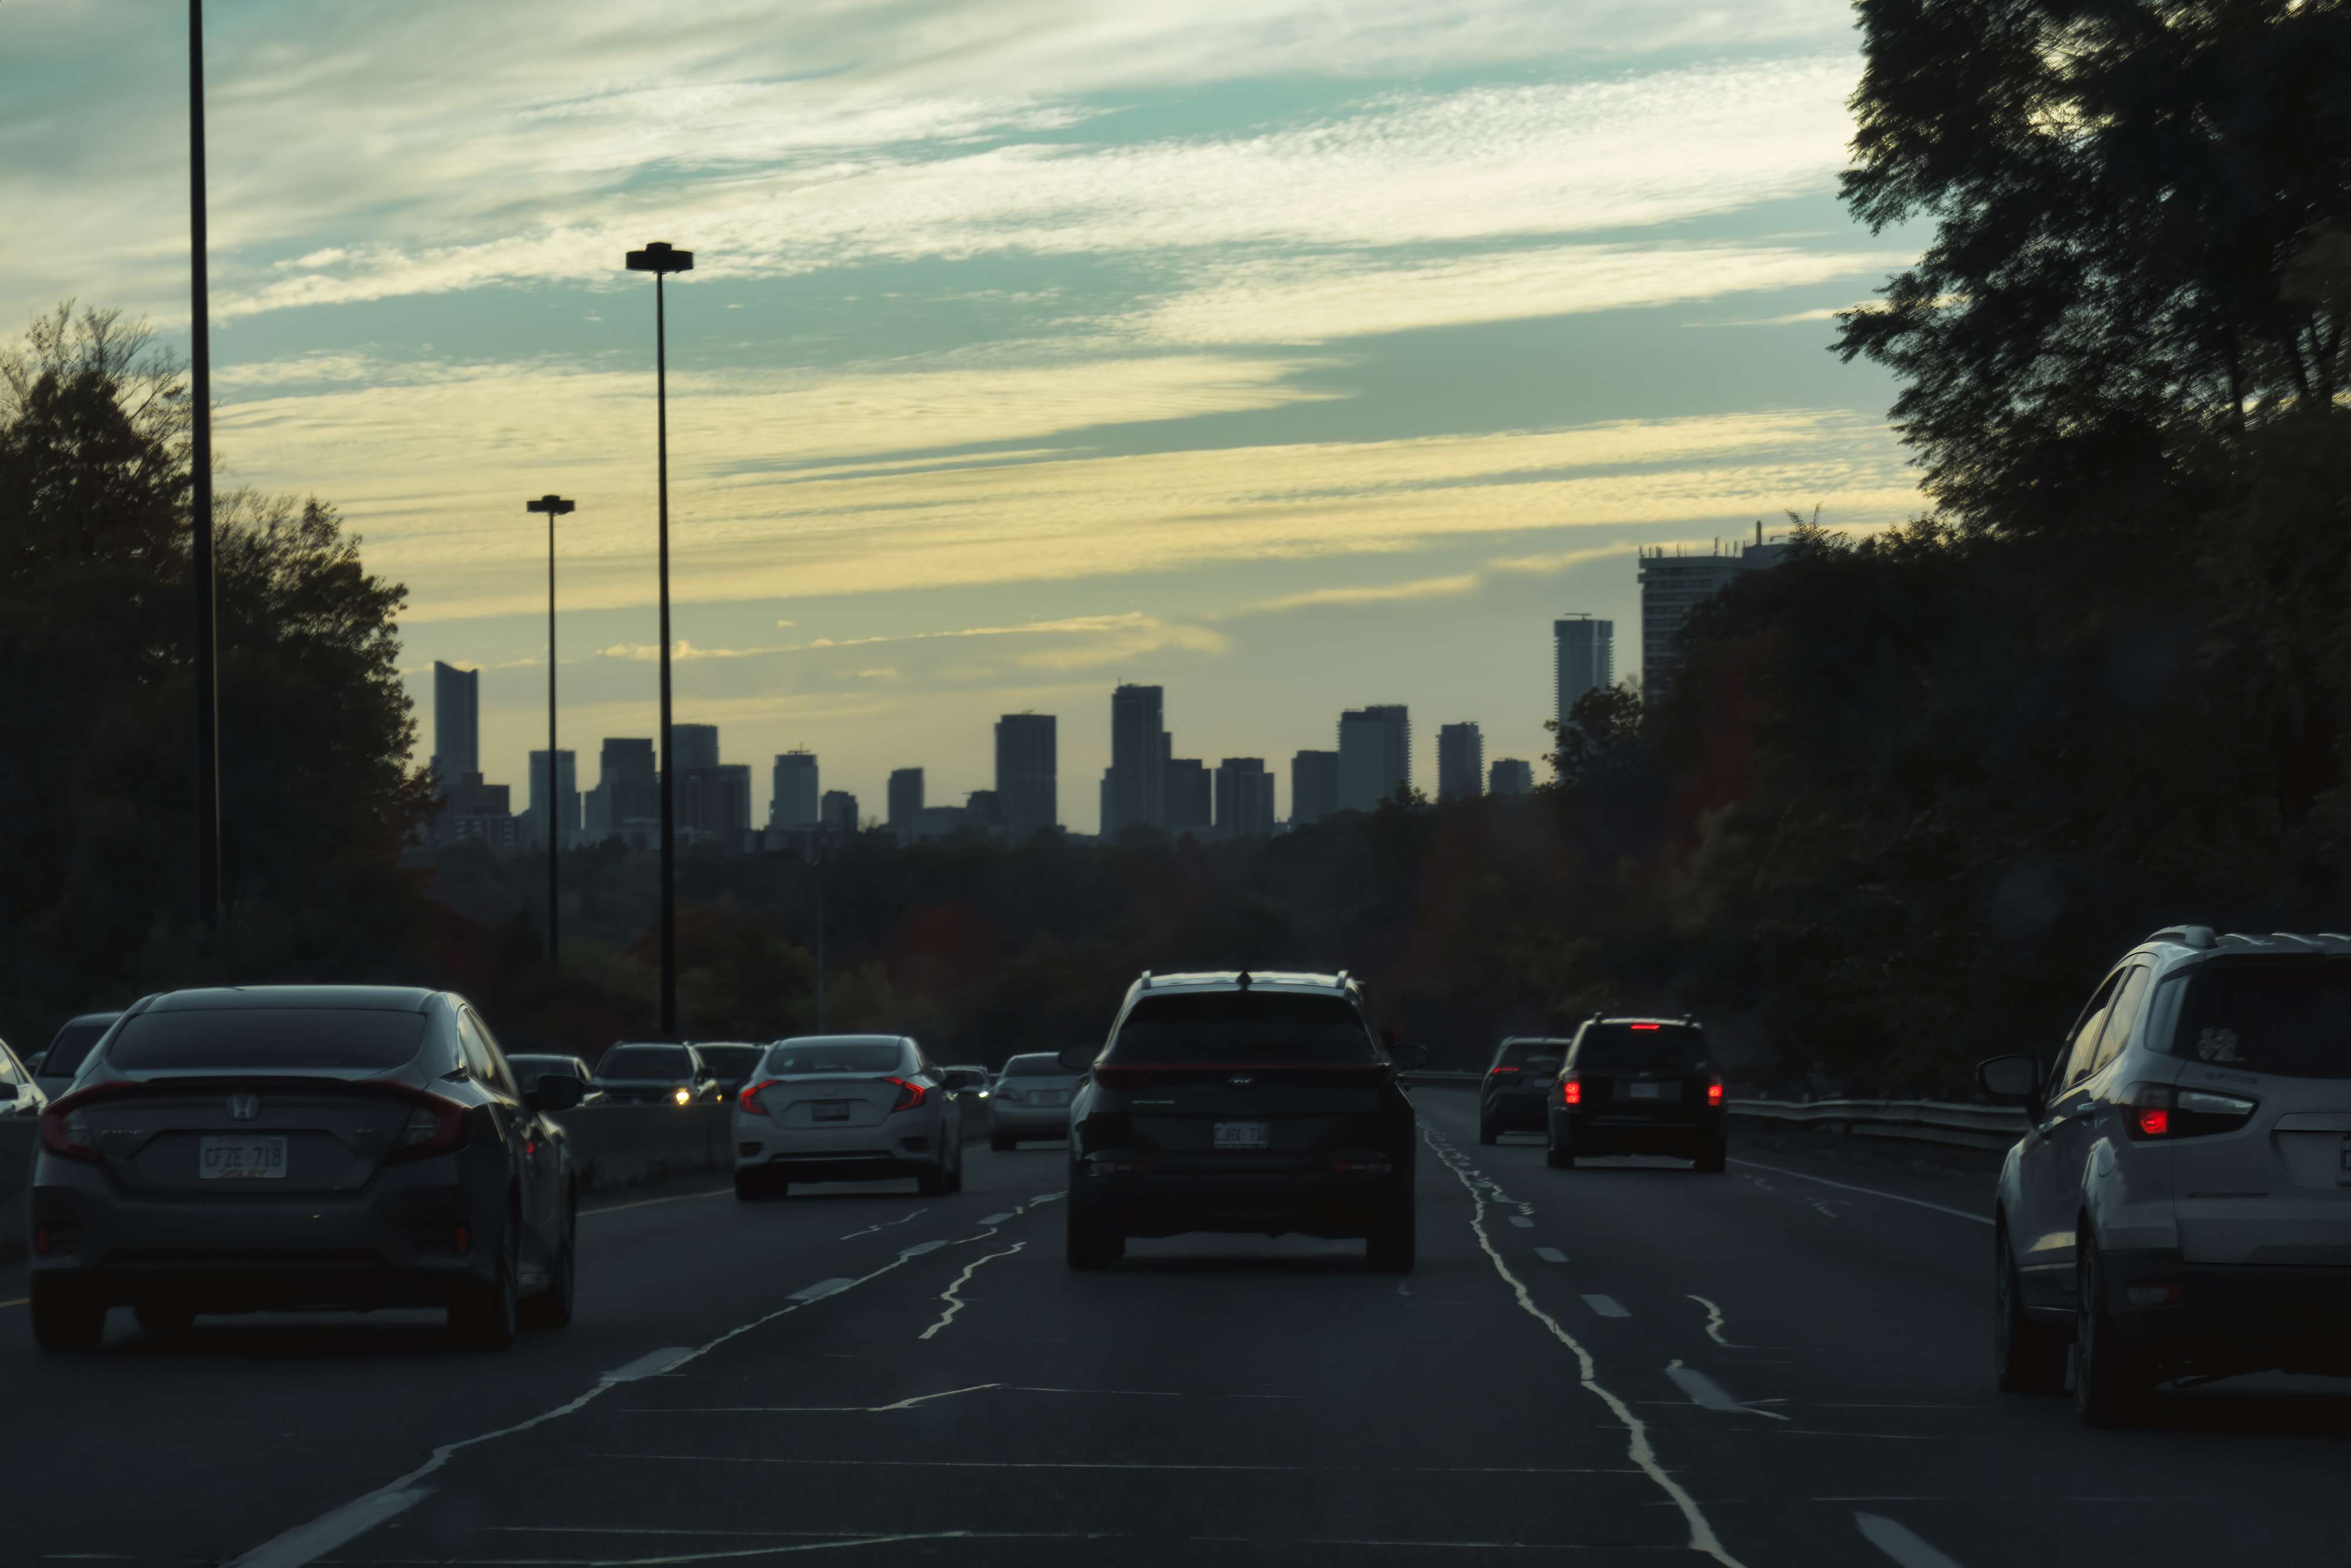 Cars driving on a highway towards a city skyline at dusk. The sky is streaked with clouds